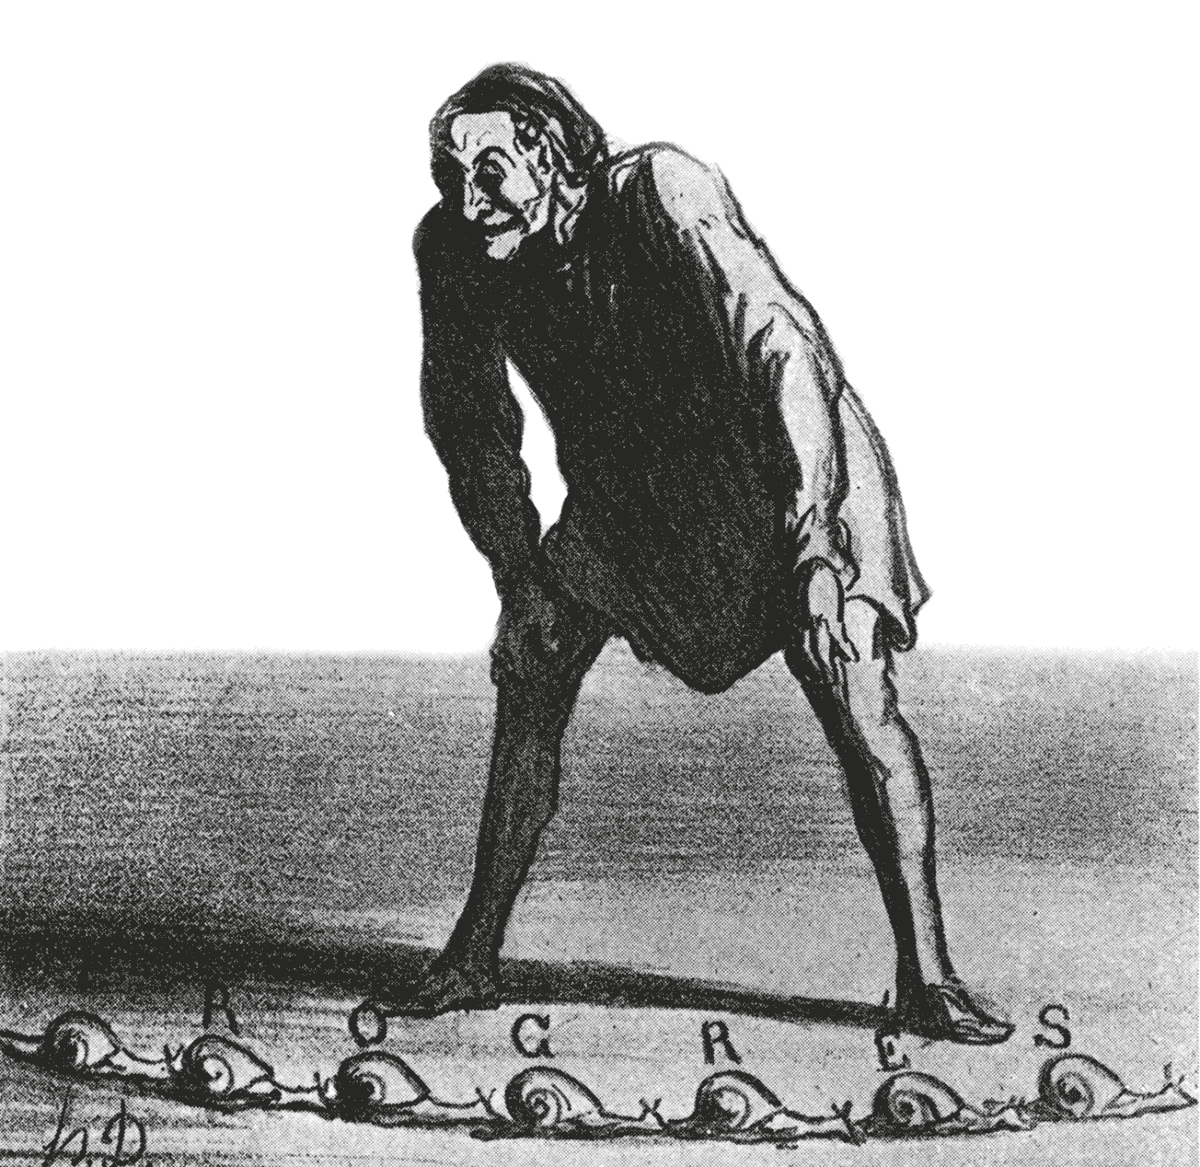 An illustration by Honoré Daumier titled “Les escargots non sympathiques” published in Le Charivari, 25 September eighteen sixty-nine. Nineteen years after Jules Allix’s article, the trope of “sympathetic snails” had retained enough currency to be used as the title of this cartoon. Where Allix’s sympathetic snails had promised a world of instantaneous communication, a trail of non-sympathetic snails in this illustration, shown under the word “Progres”, represents the slow progress of social reforms promised by the Second Empire to workers like the one depicted in Daumier’s drawing.